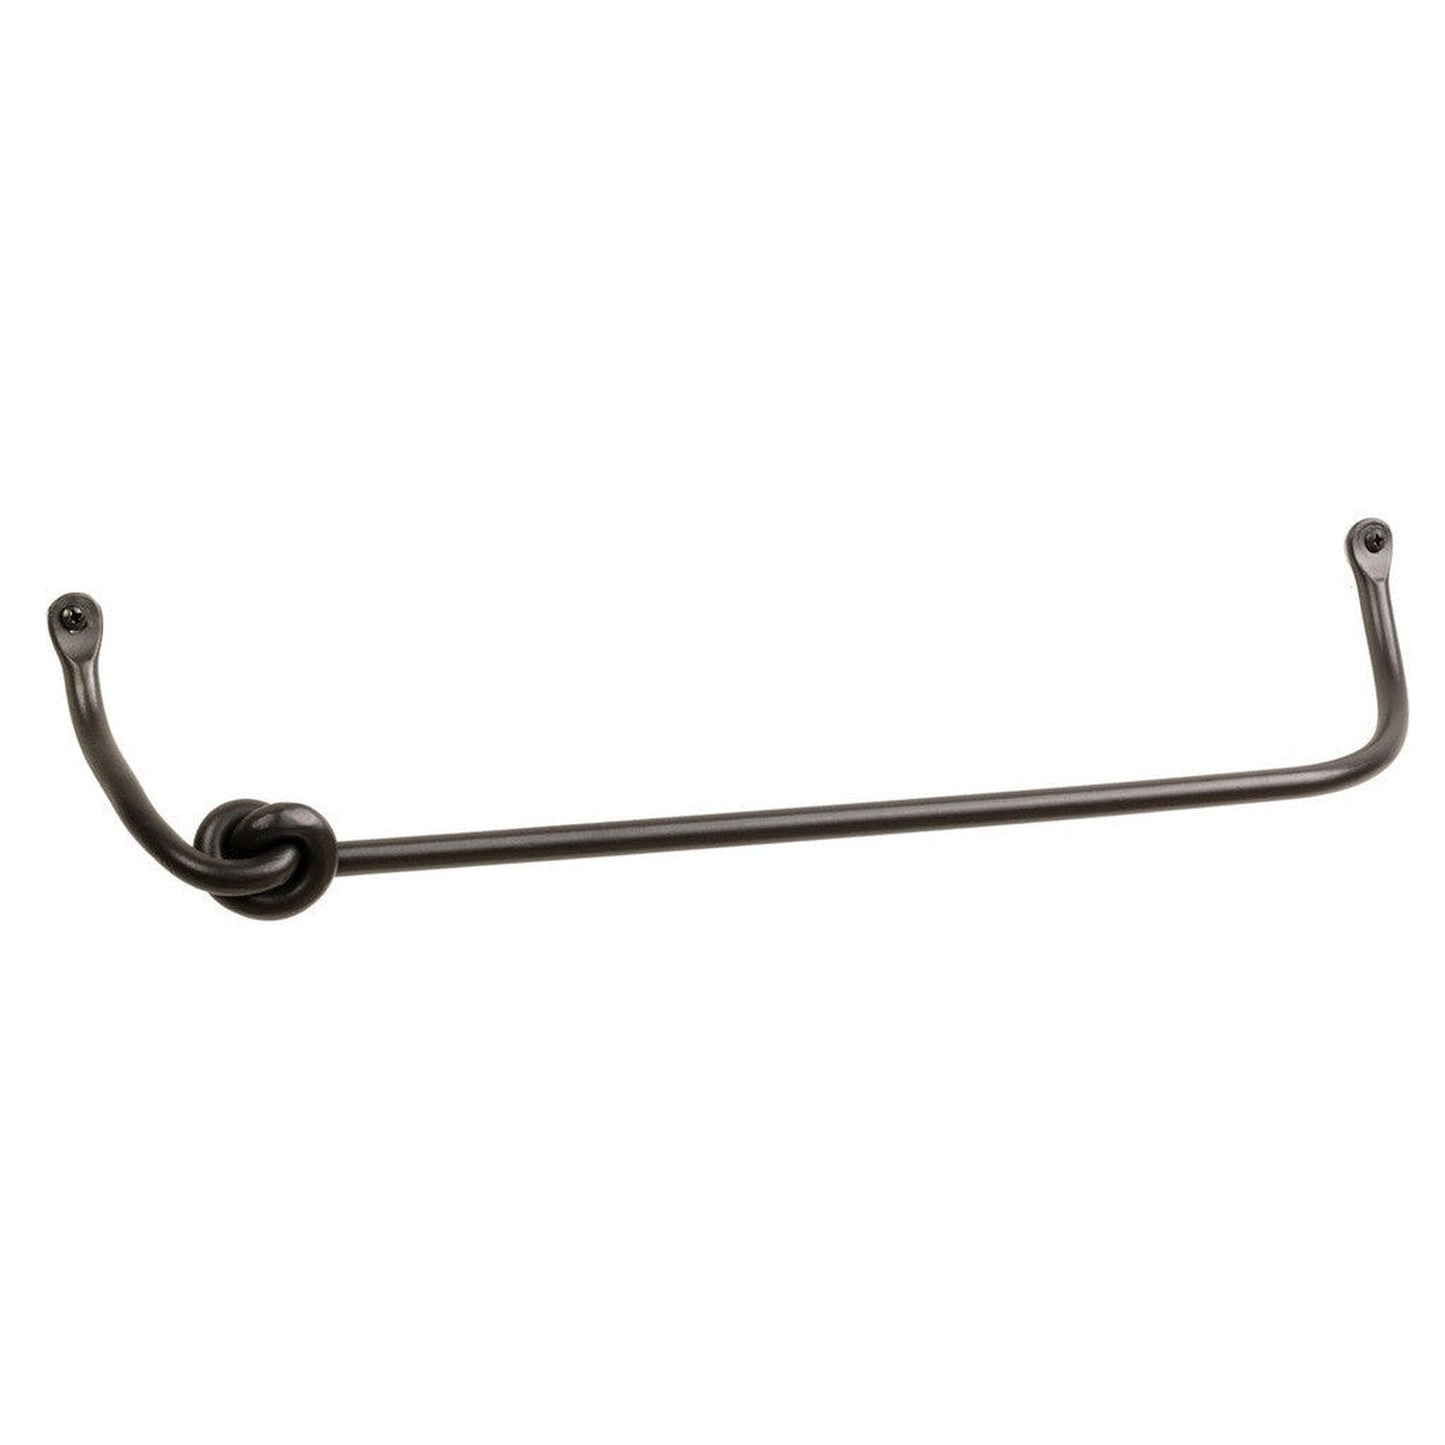 Stone County Ironworks Knot 32" Natural Black Iron Towel Bar With Copper Iron Accent